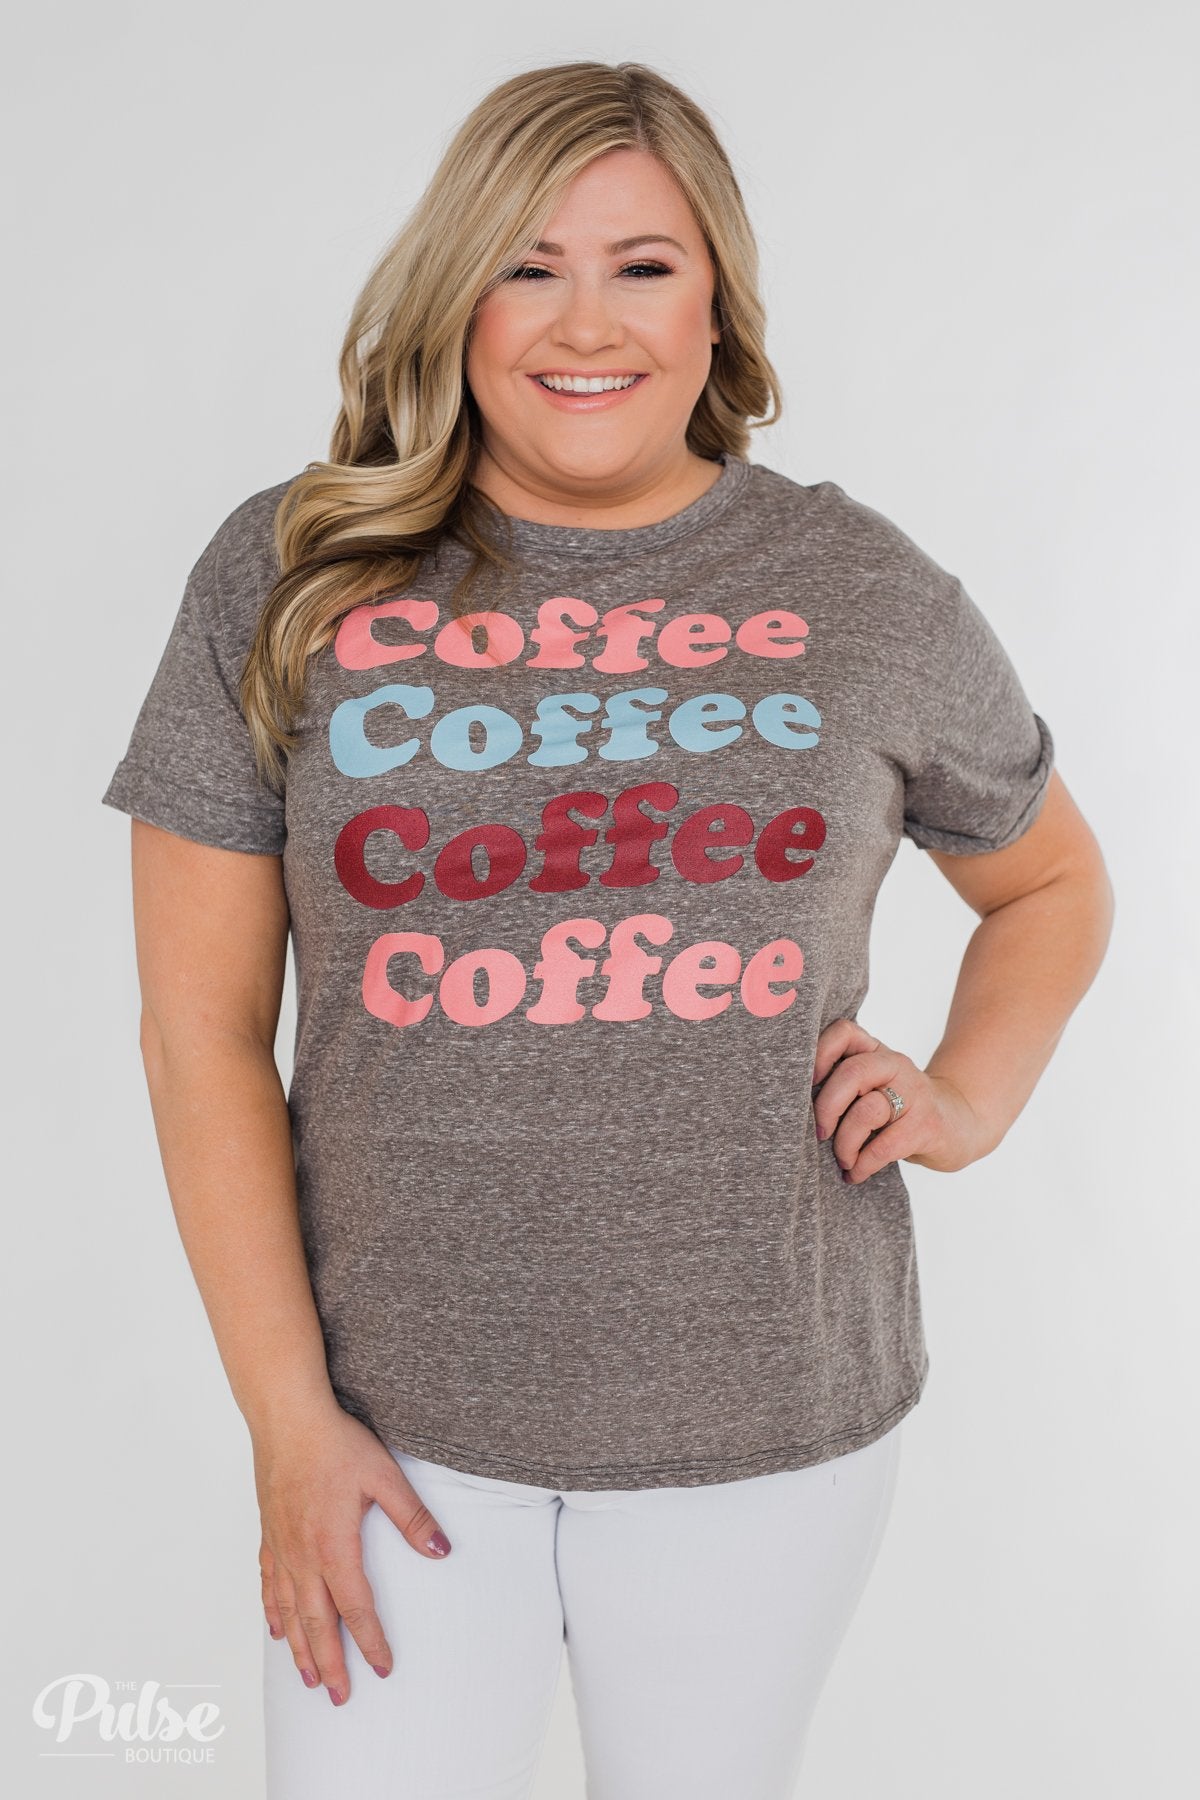 Multi-Colored "Coffee" Short Sleeve Top- Charcoal